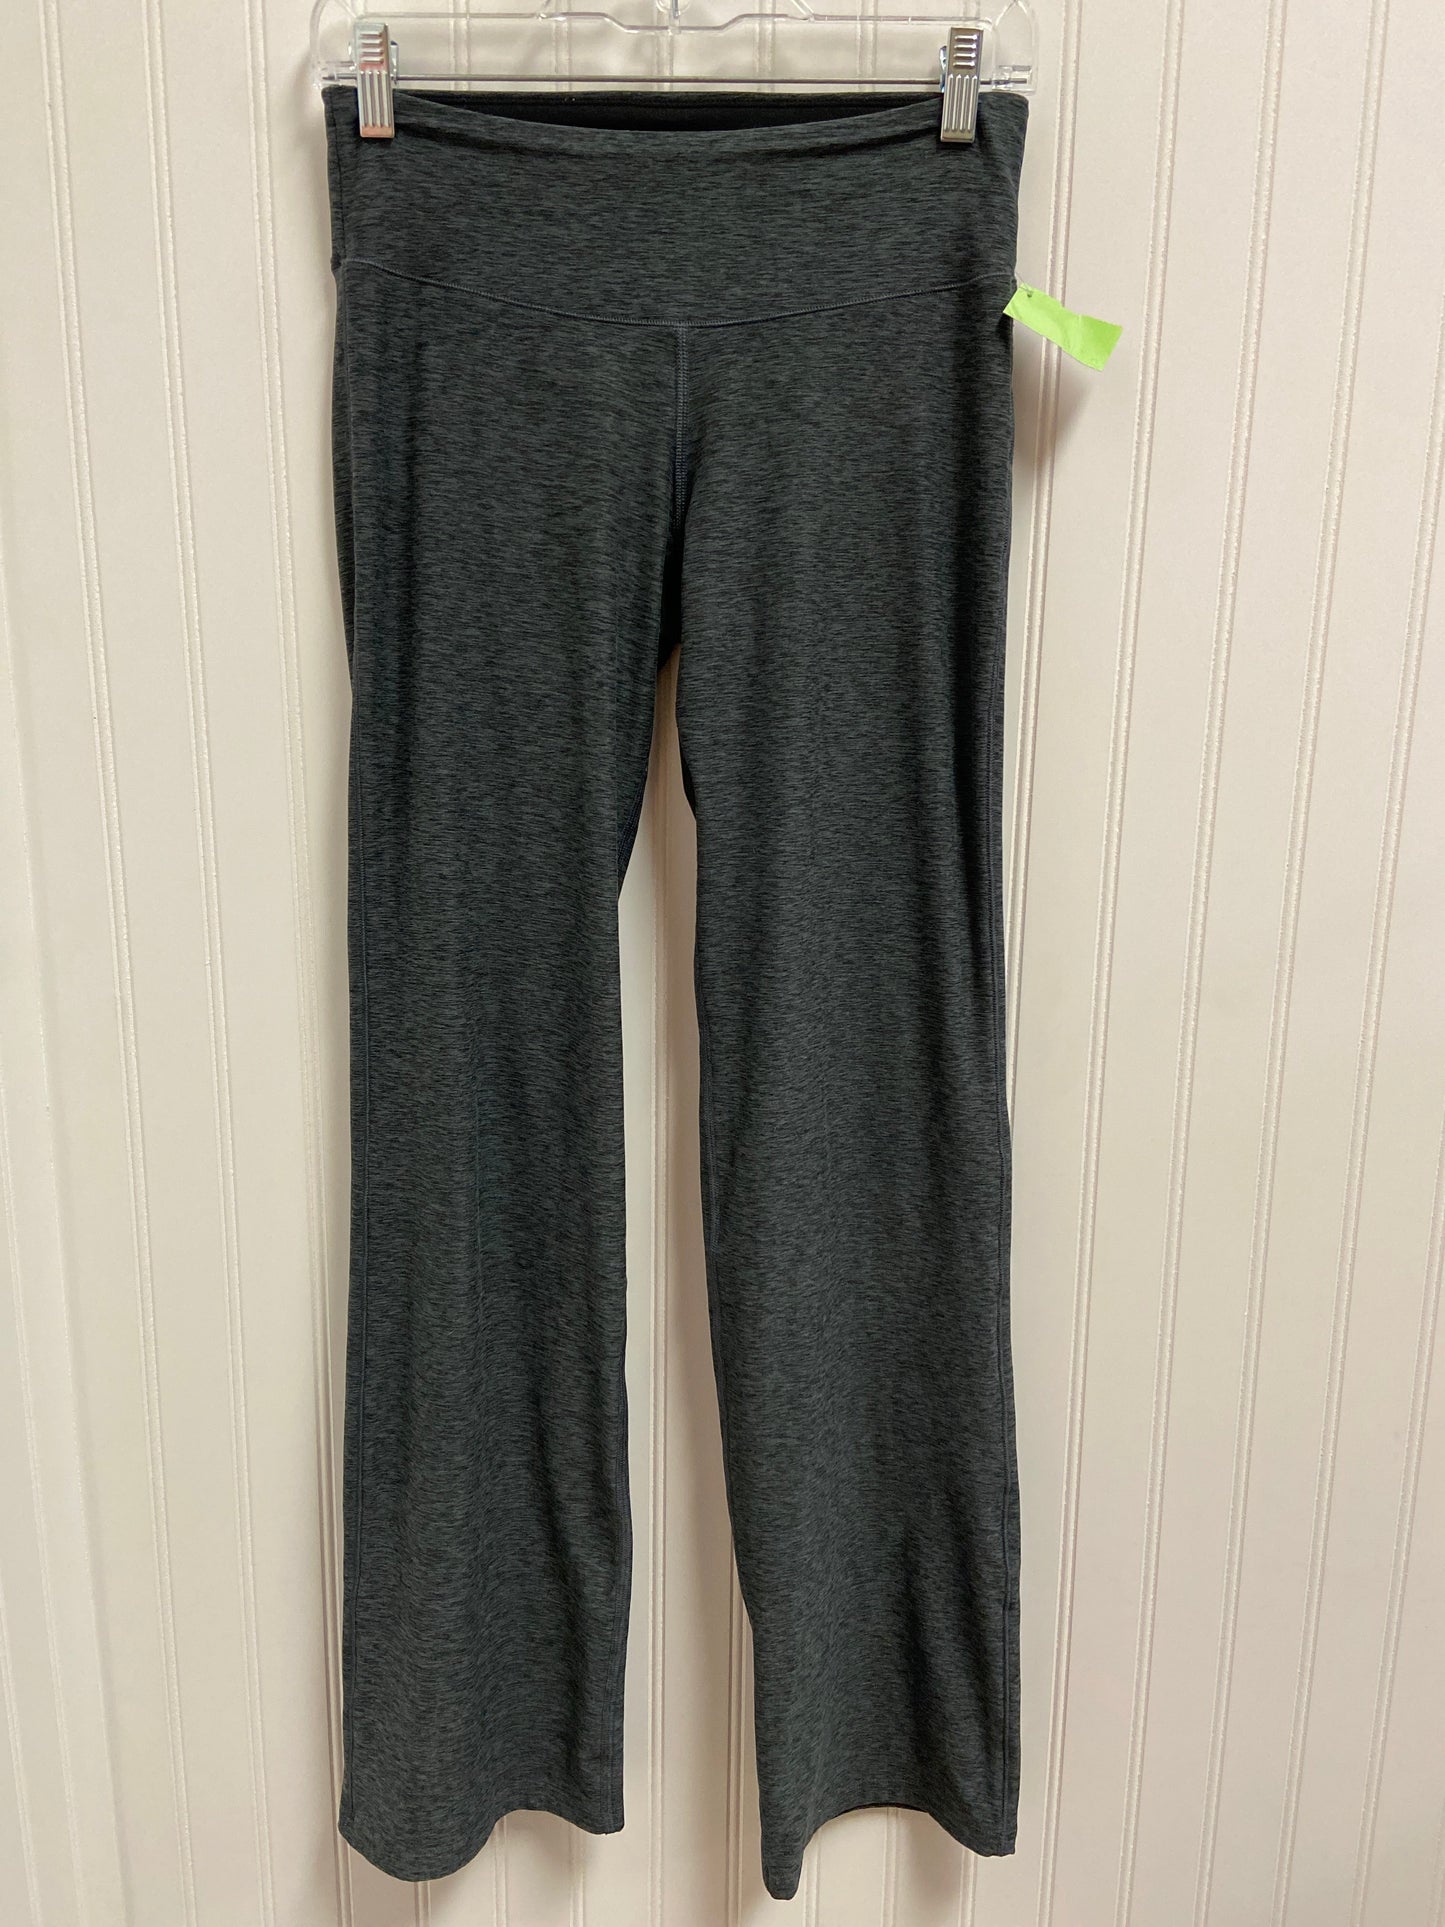 Athletic Leggings By New Balance  Size: S